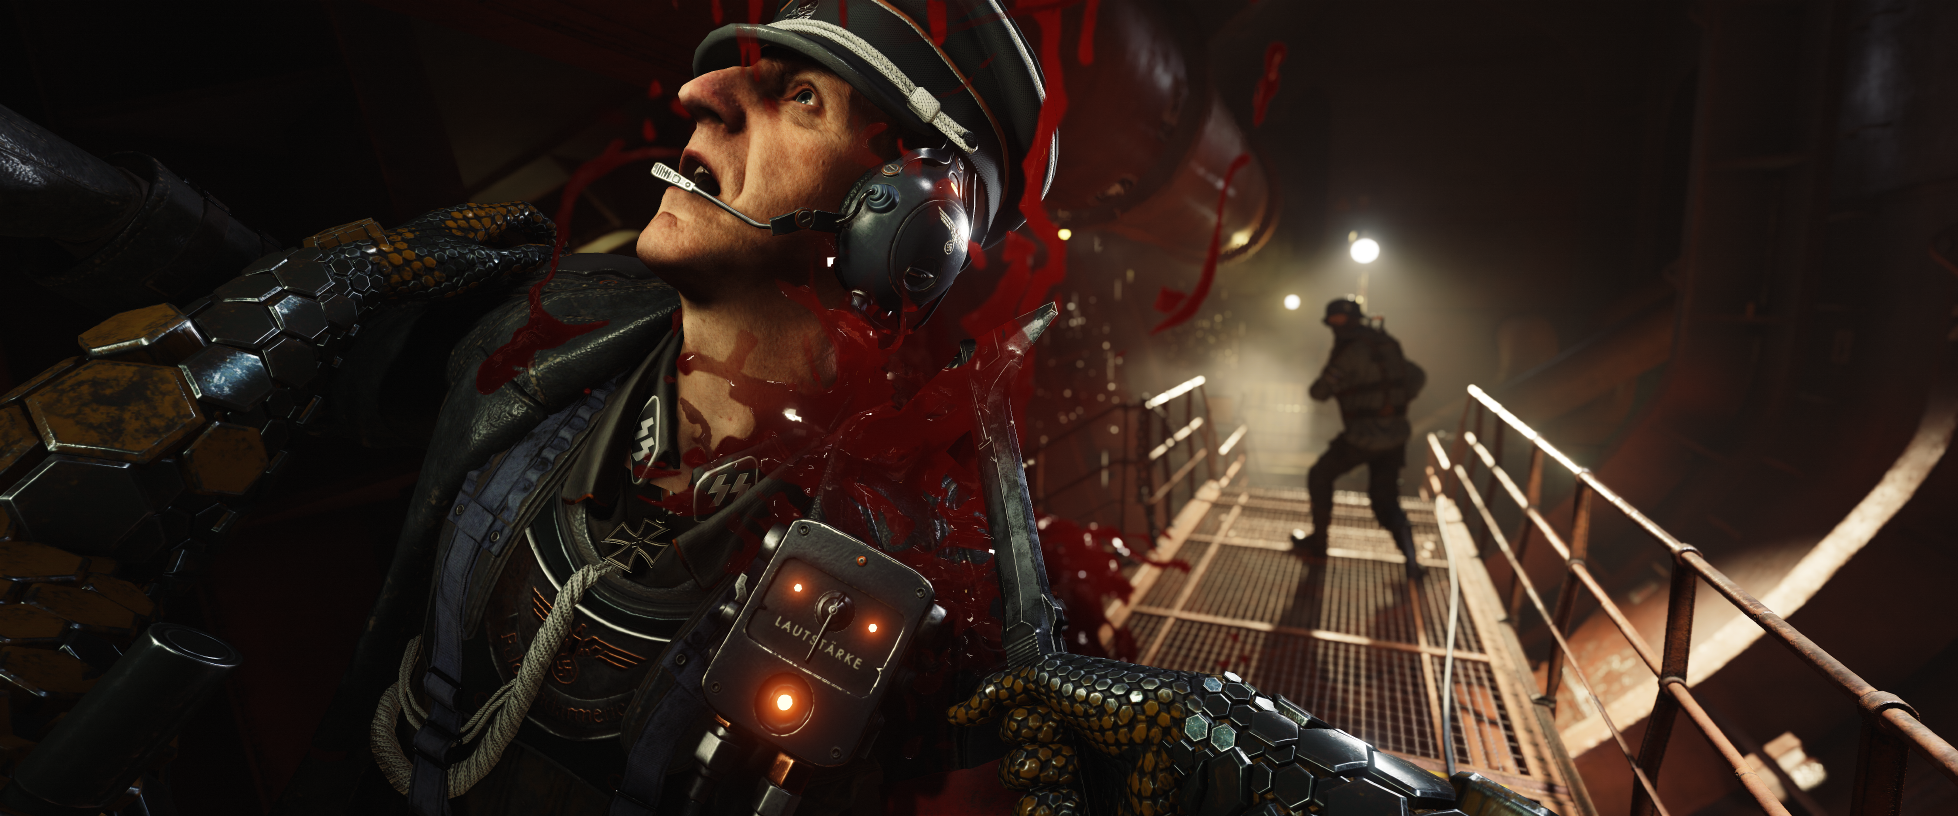 jubilæum Stratford på Avon Perpetual Wolfenstein 2: The New Colossus continues to be gleefully savage - watch  all new gameplay | VG247